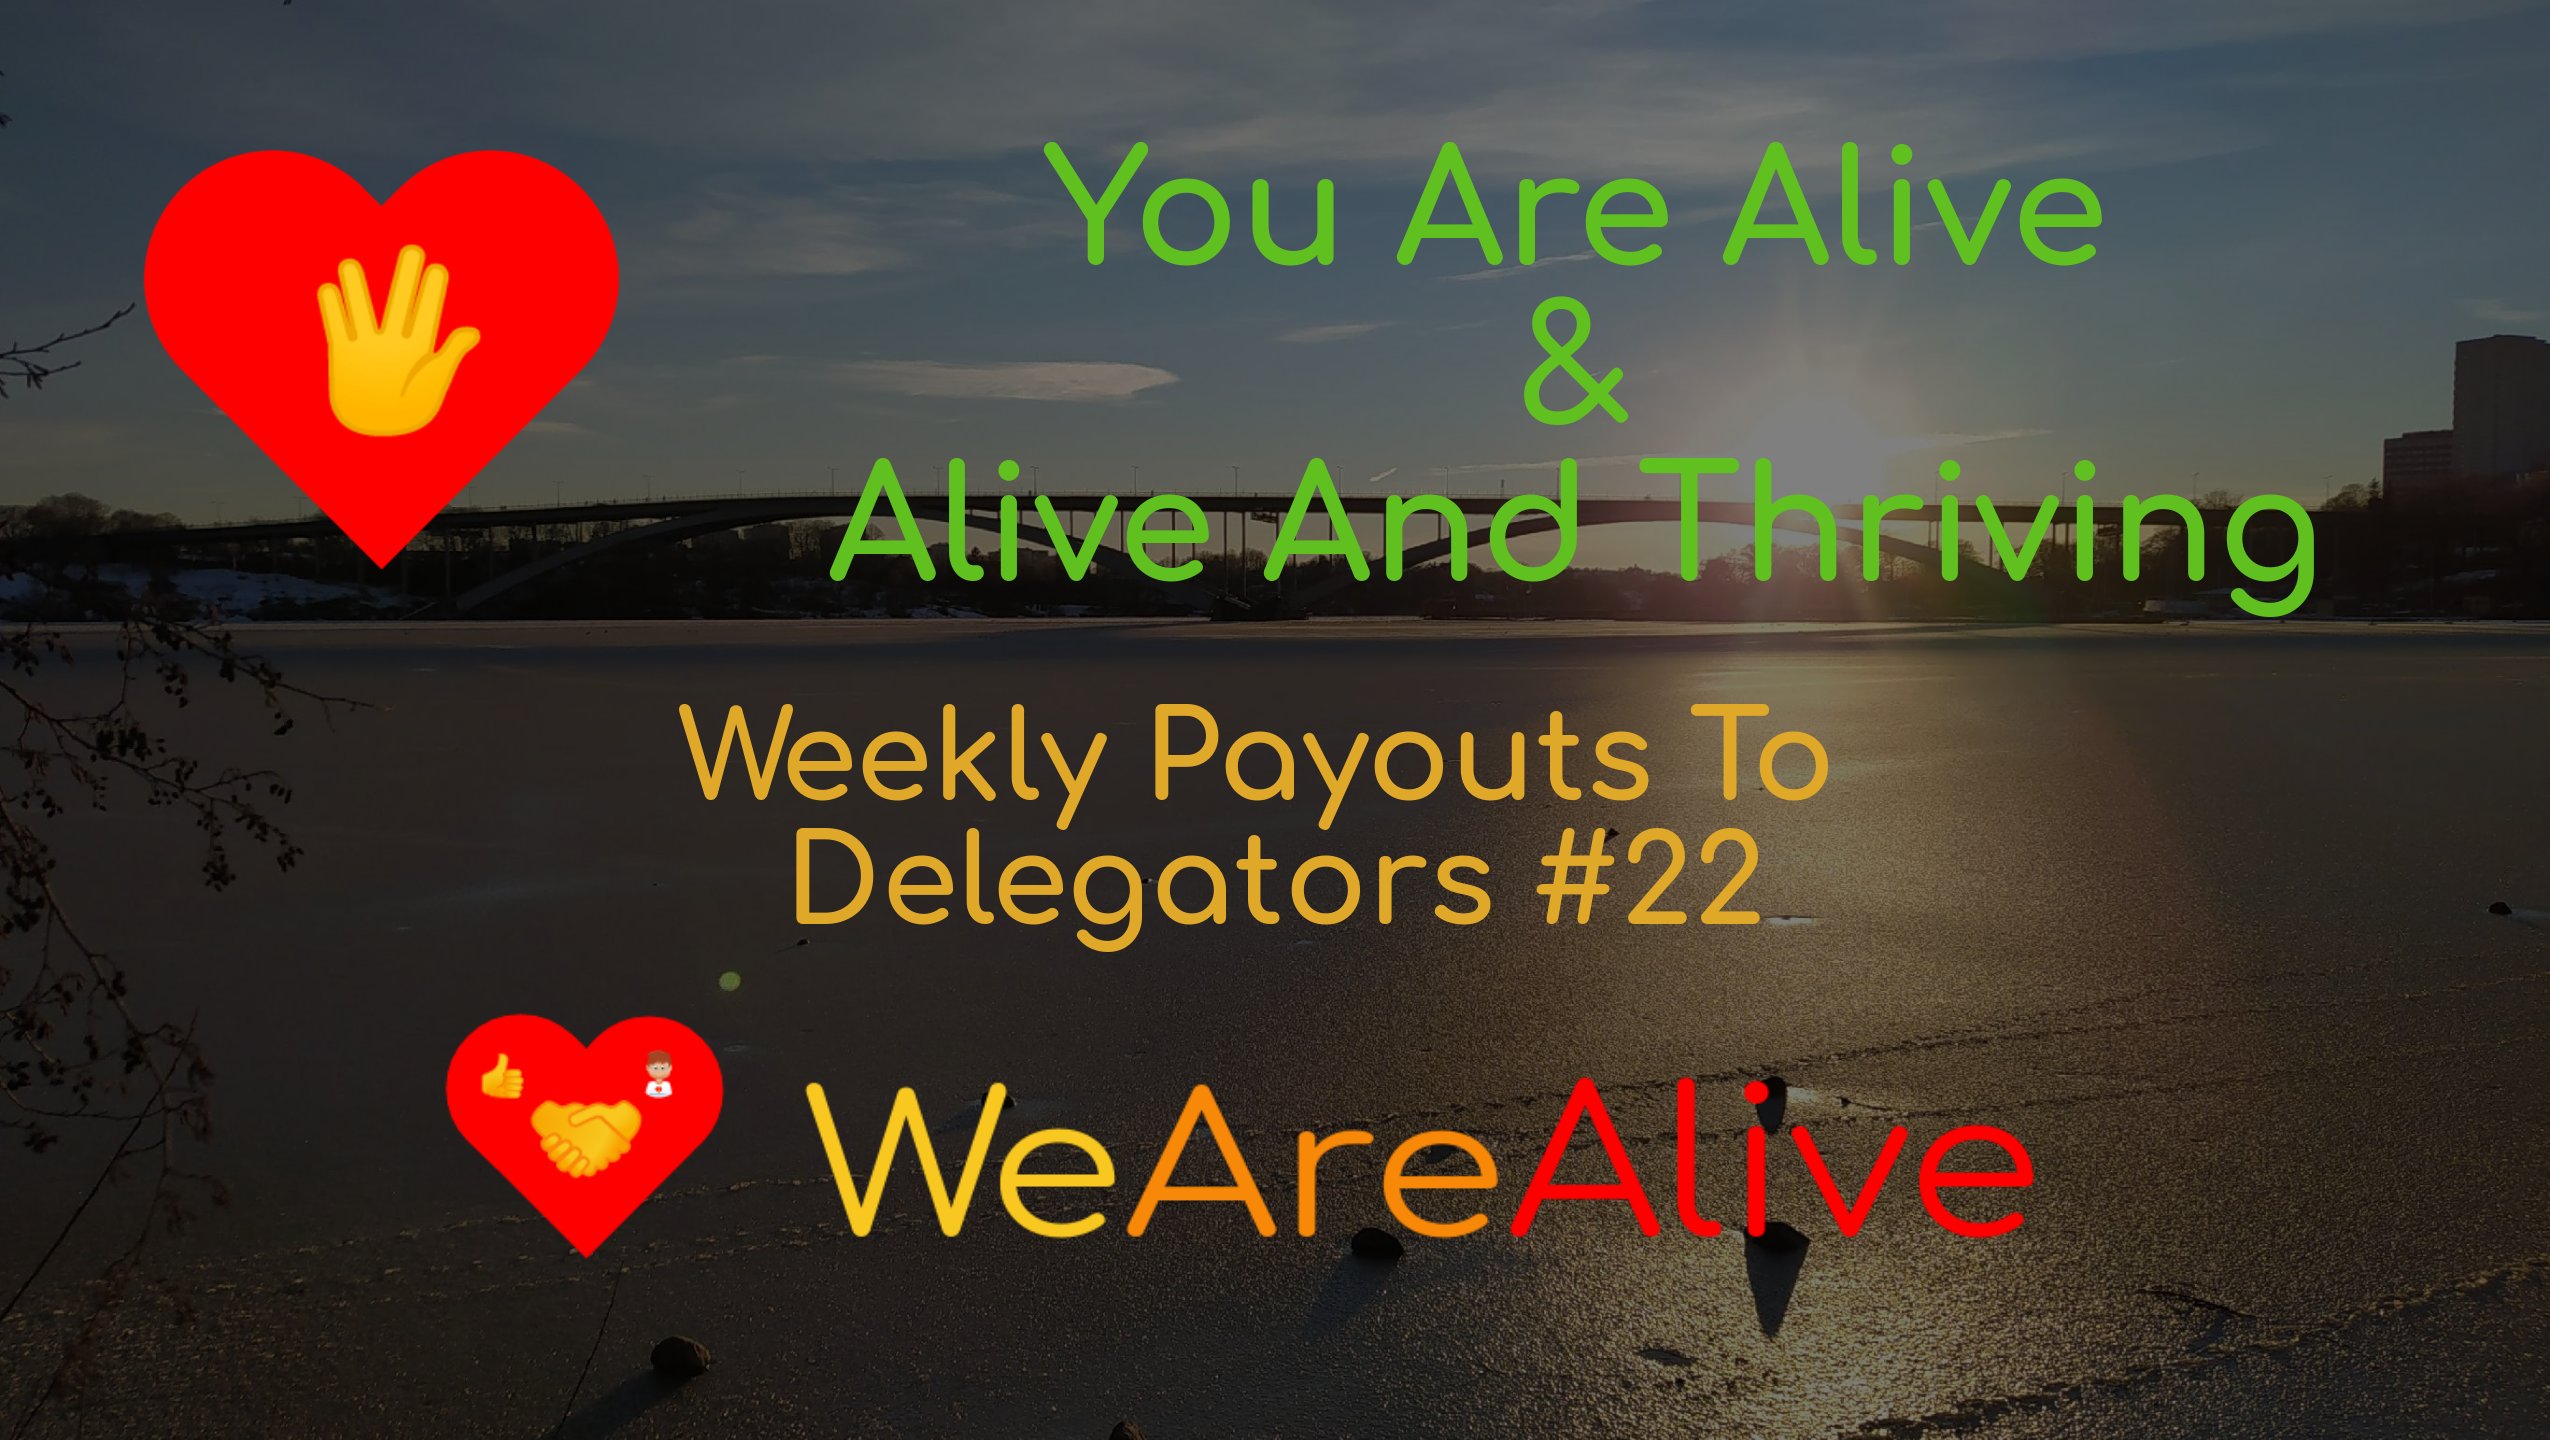 @youarealive/you-are-alive-weekly-payouts-to-delegators-22